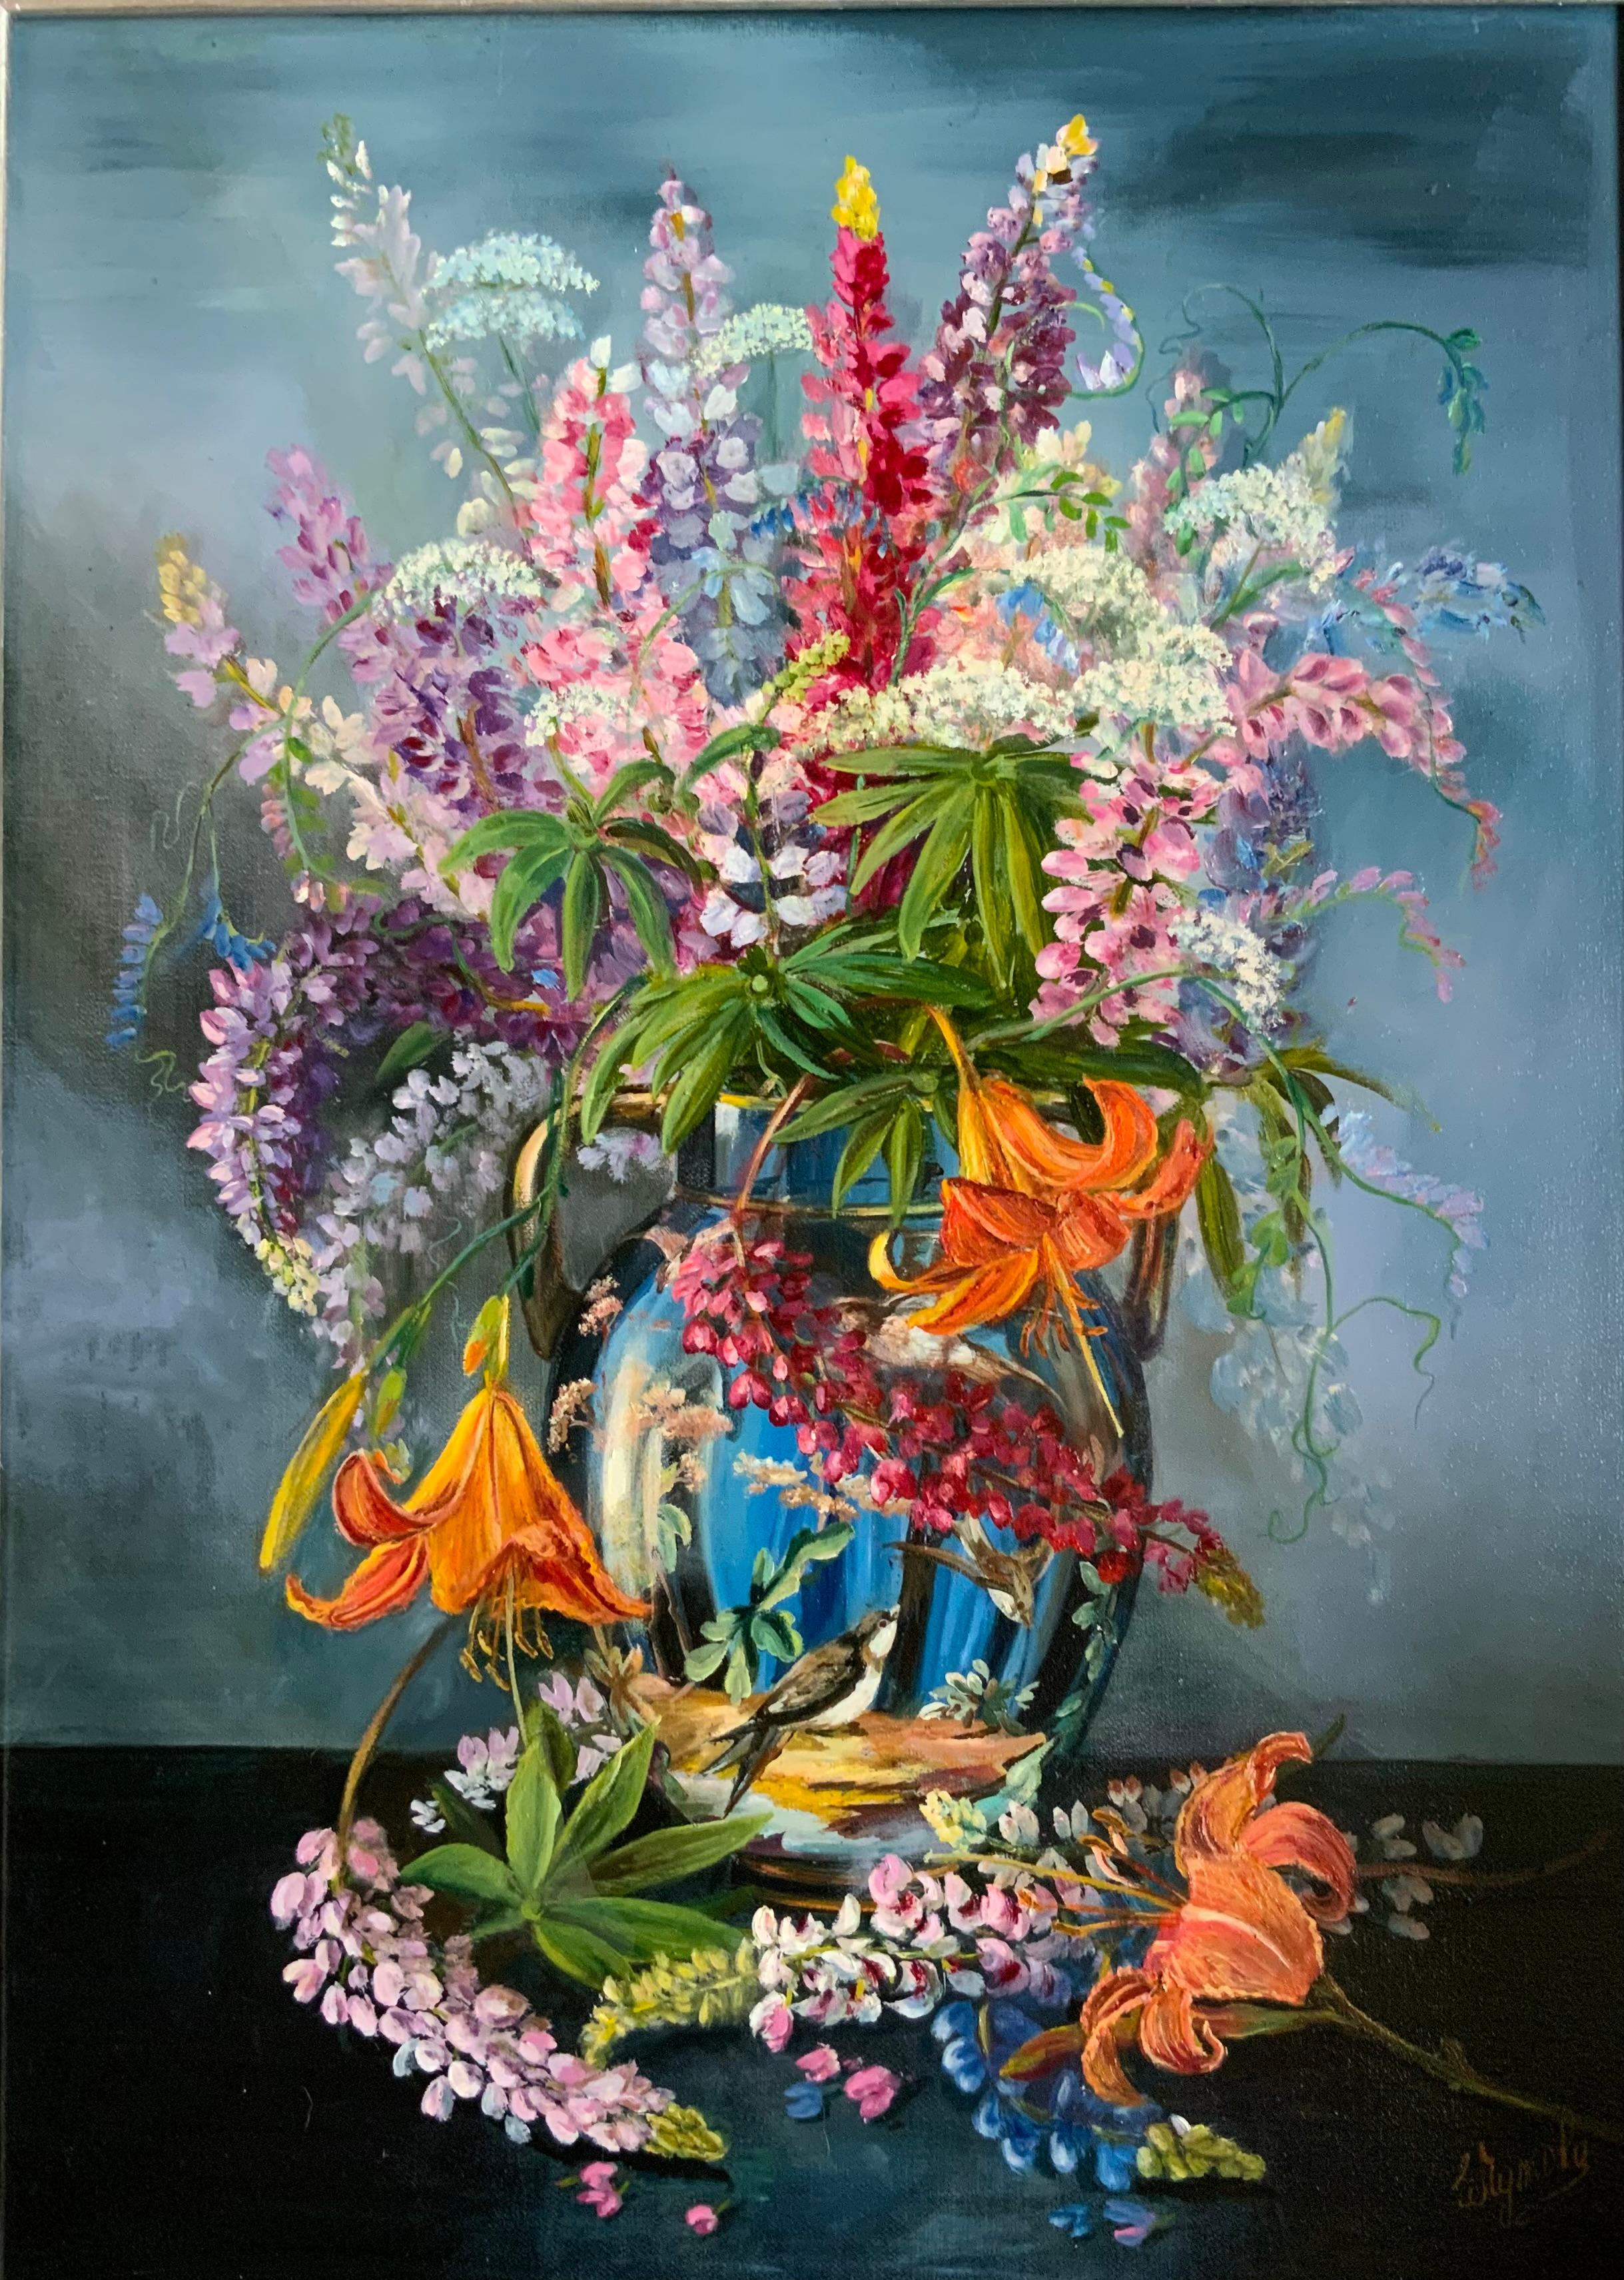 Flowers in a blue vase - Painting by Chulkova Elena